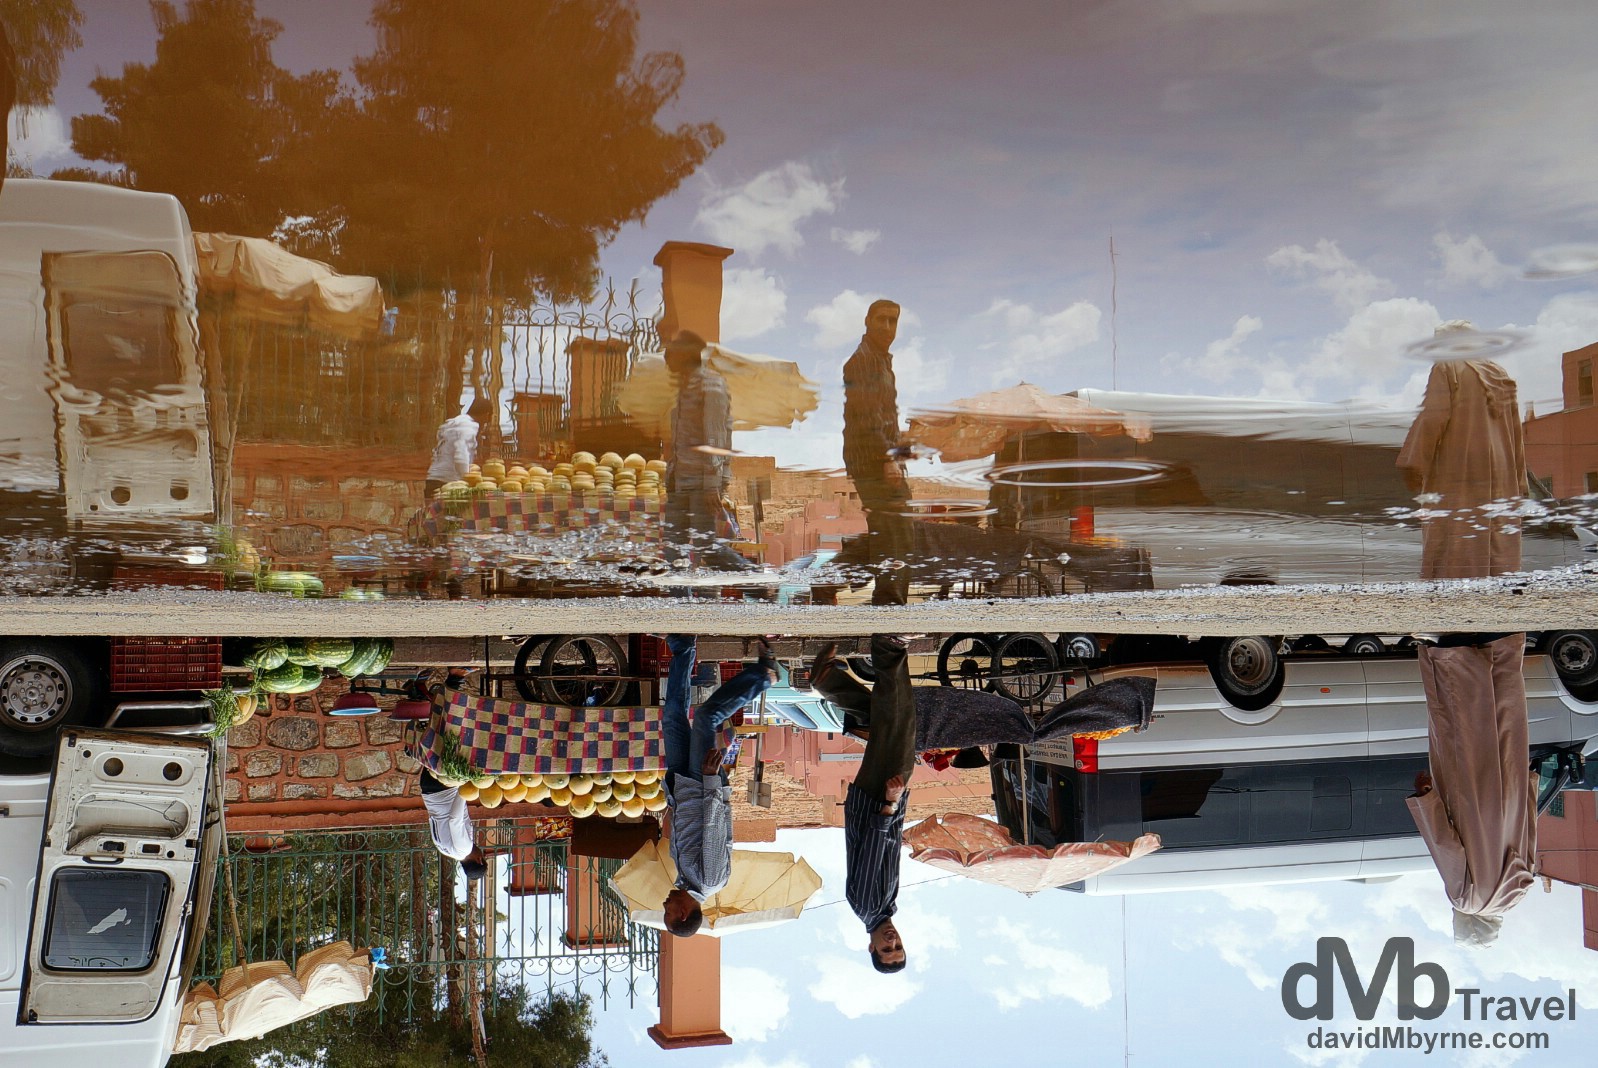 Reflections on the streets of Tinerhir, Morocco. May 17th, 2014.